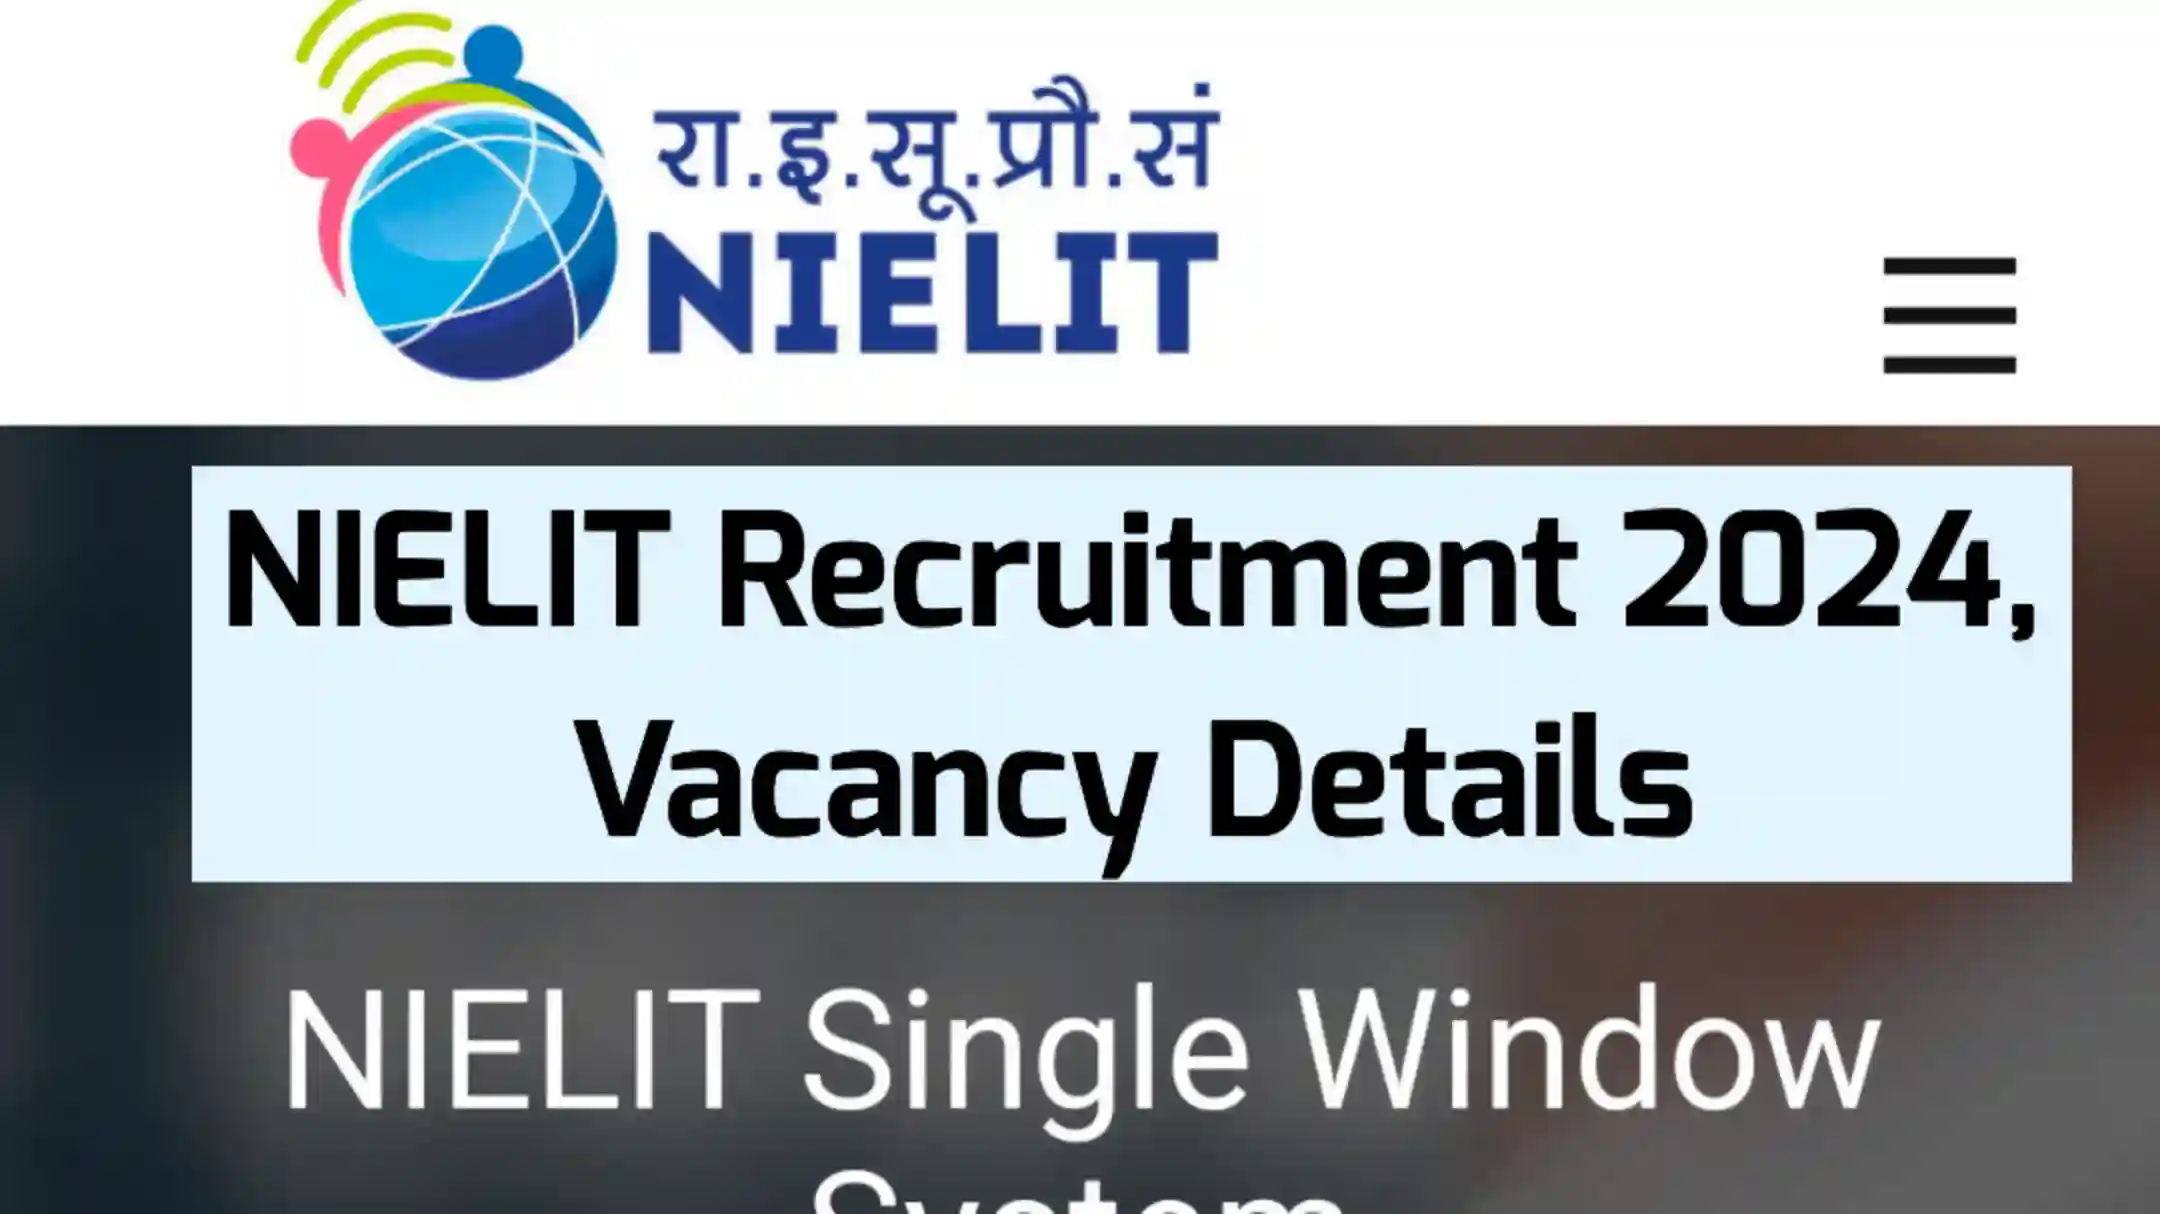 NIELIT Recruitment 2022: Salary up to 209200, Check How to Apply Online and  Other Details Here